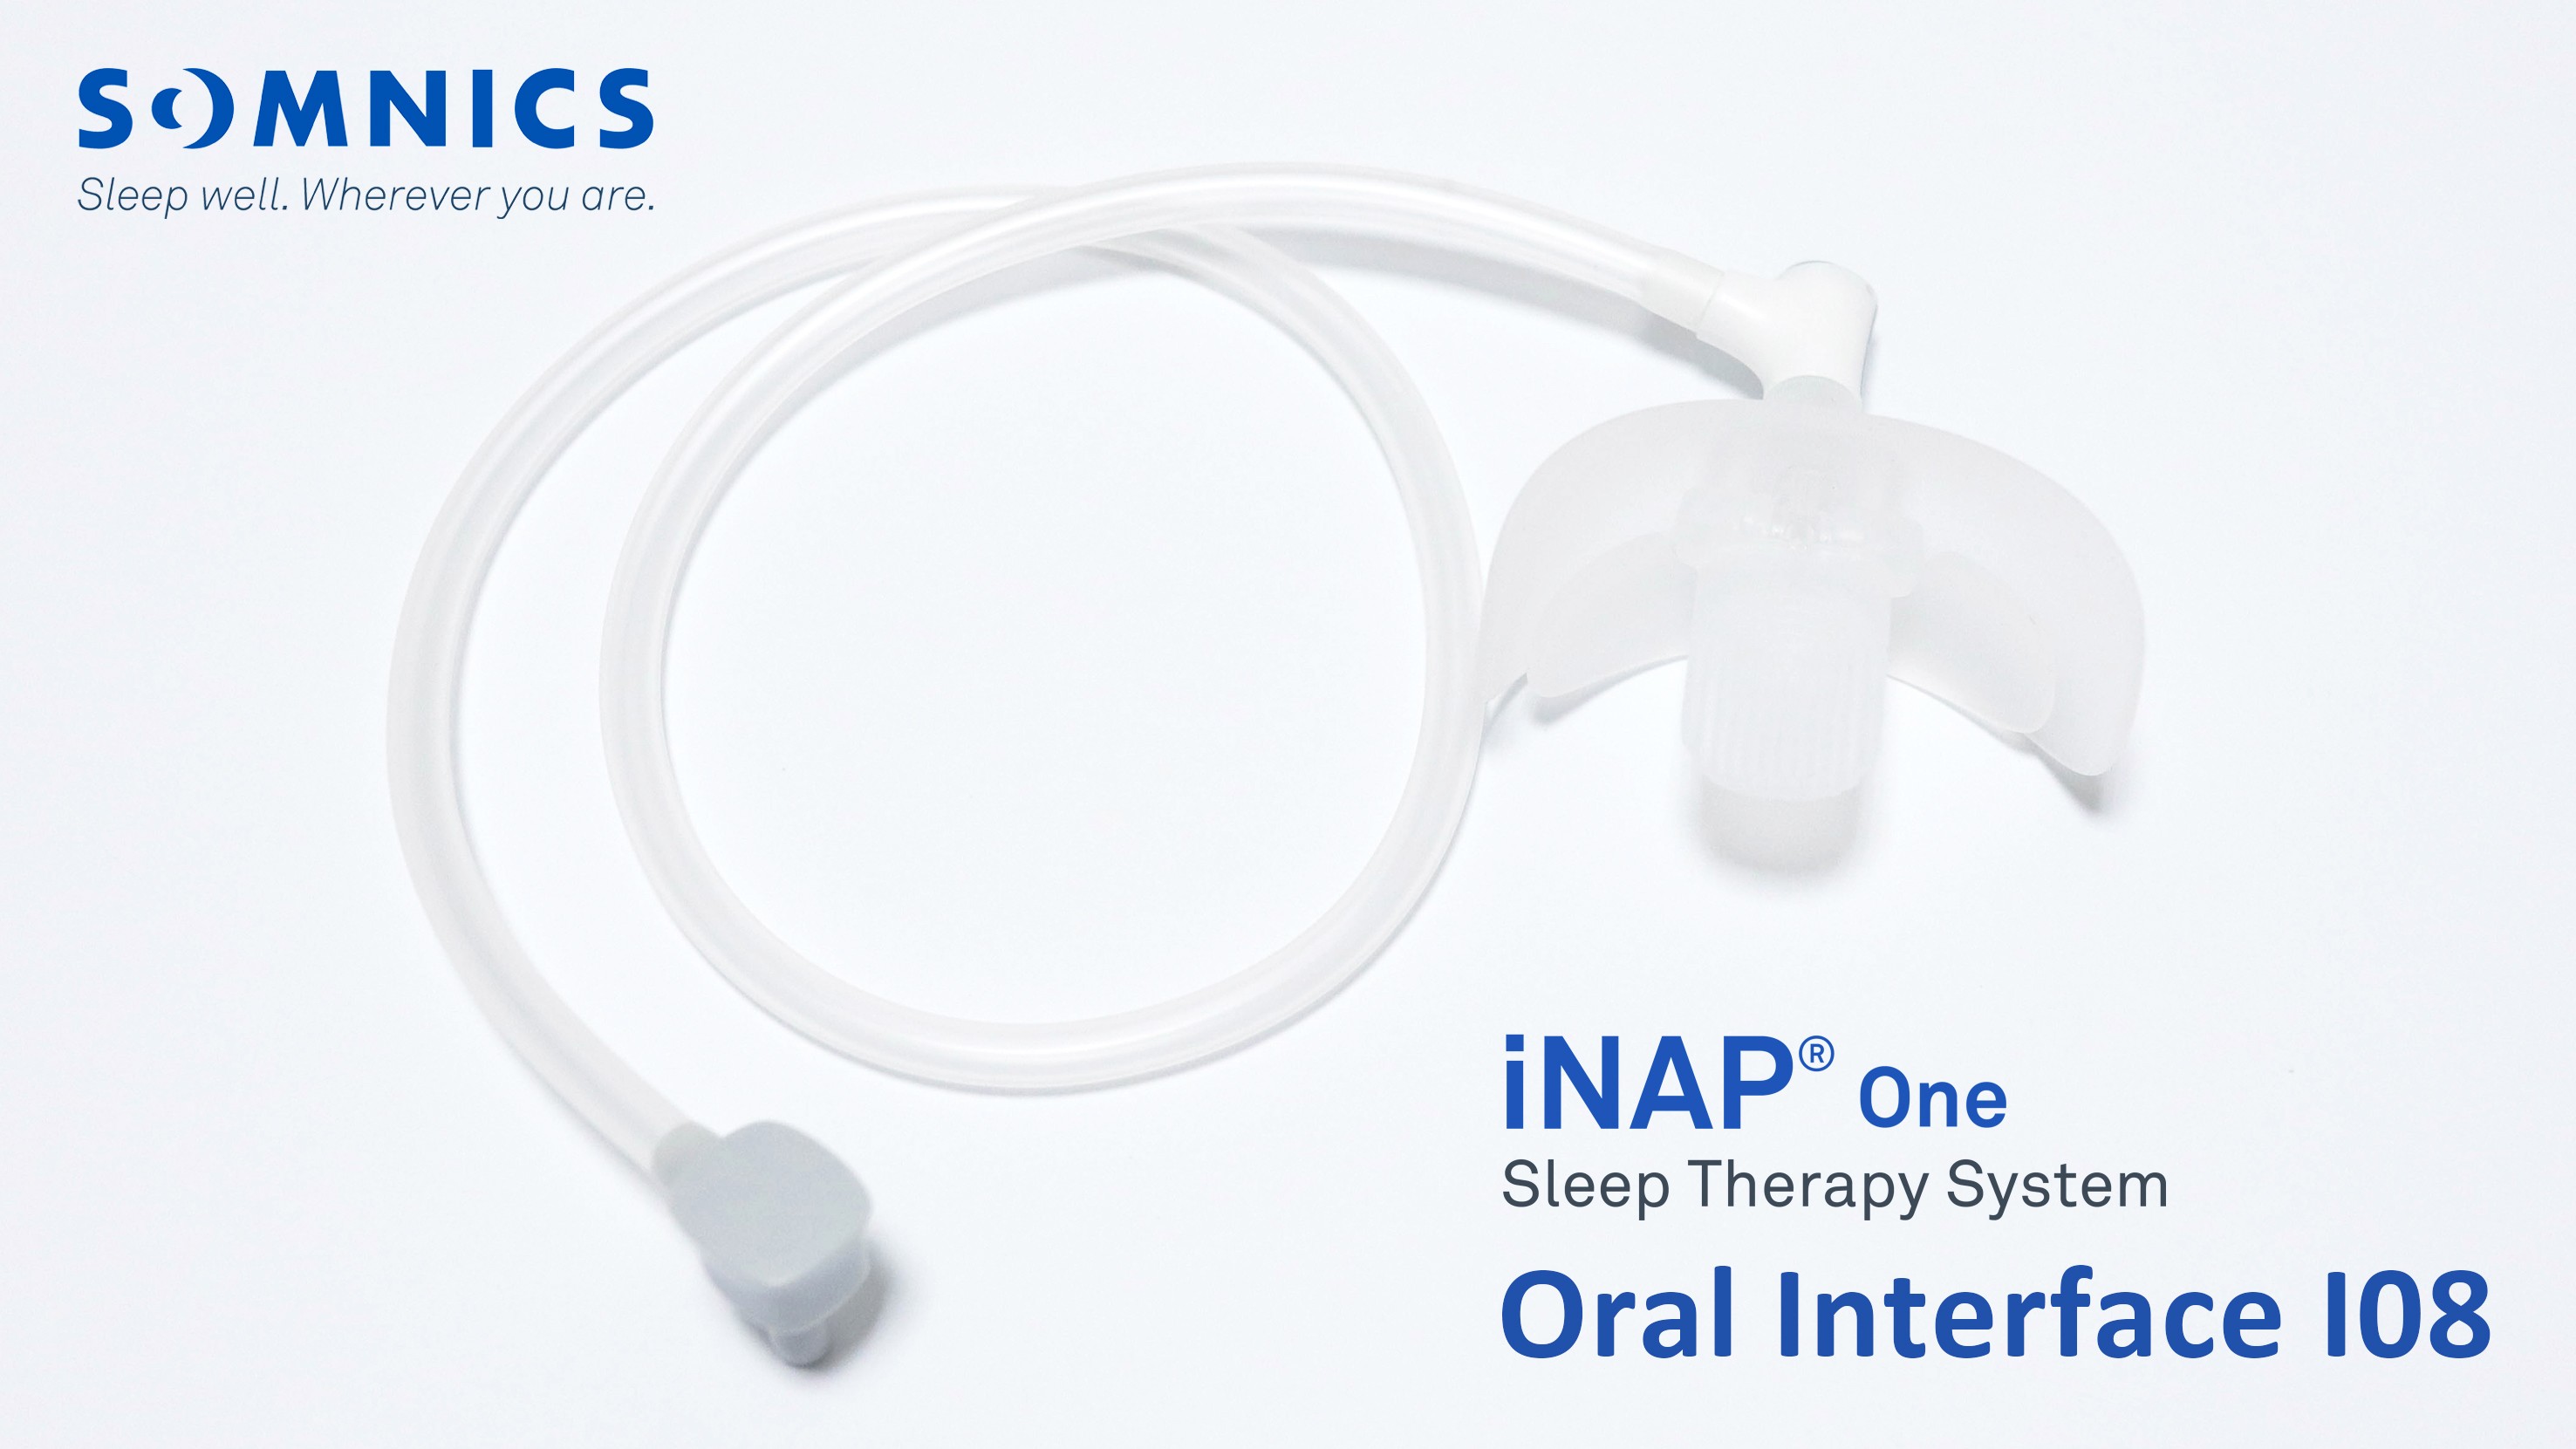 iNAP Sleep Therapy System - Oral Interface / Somnics, Inc.